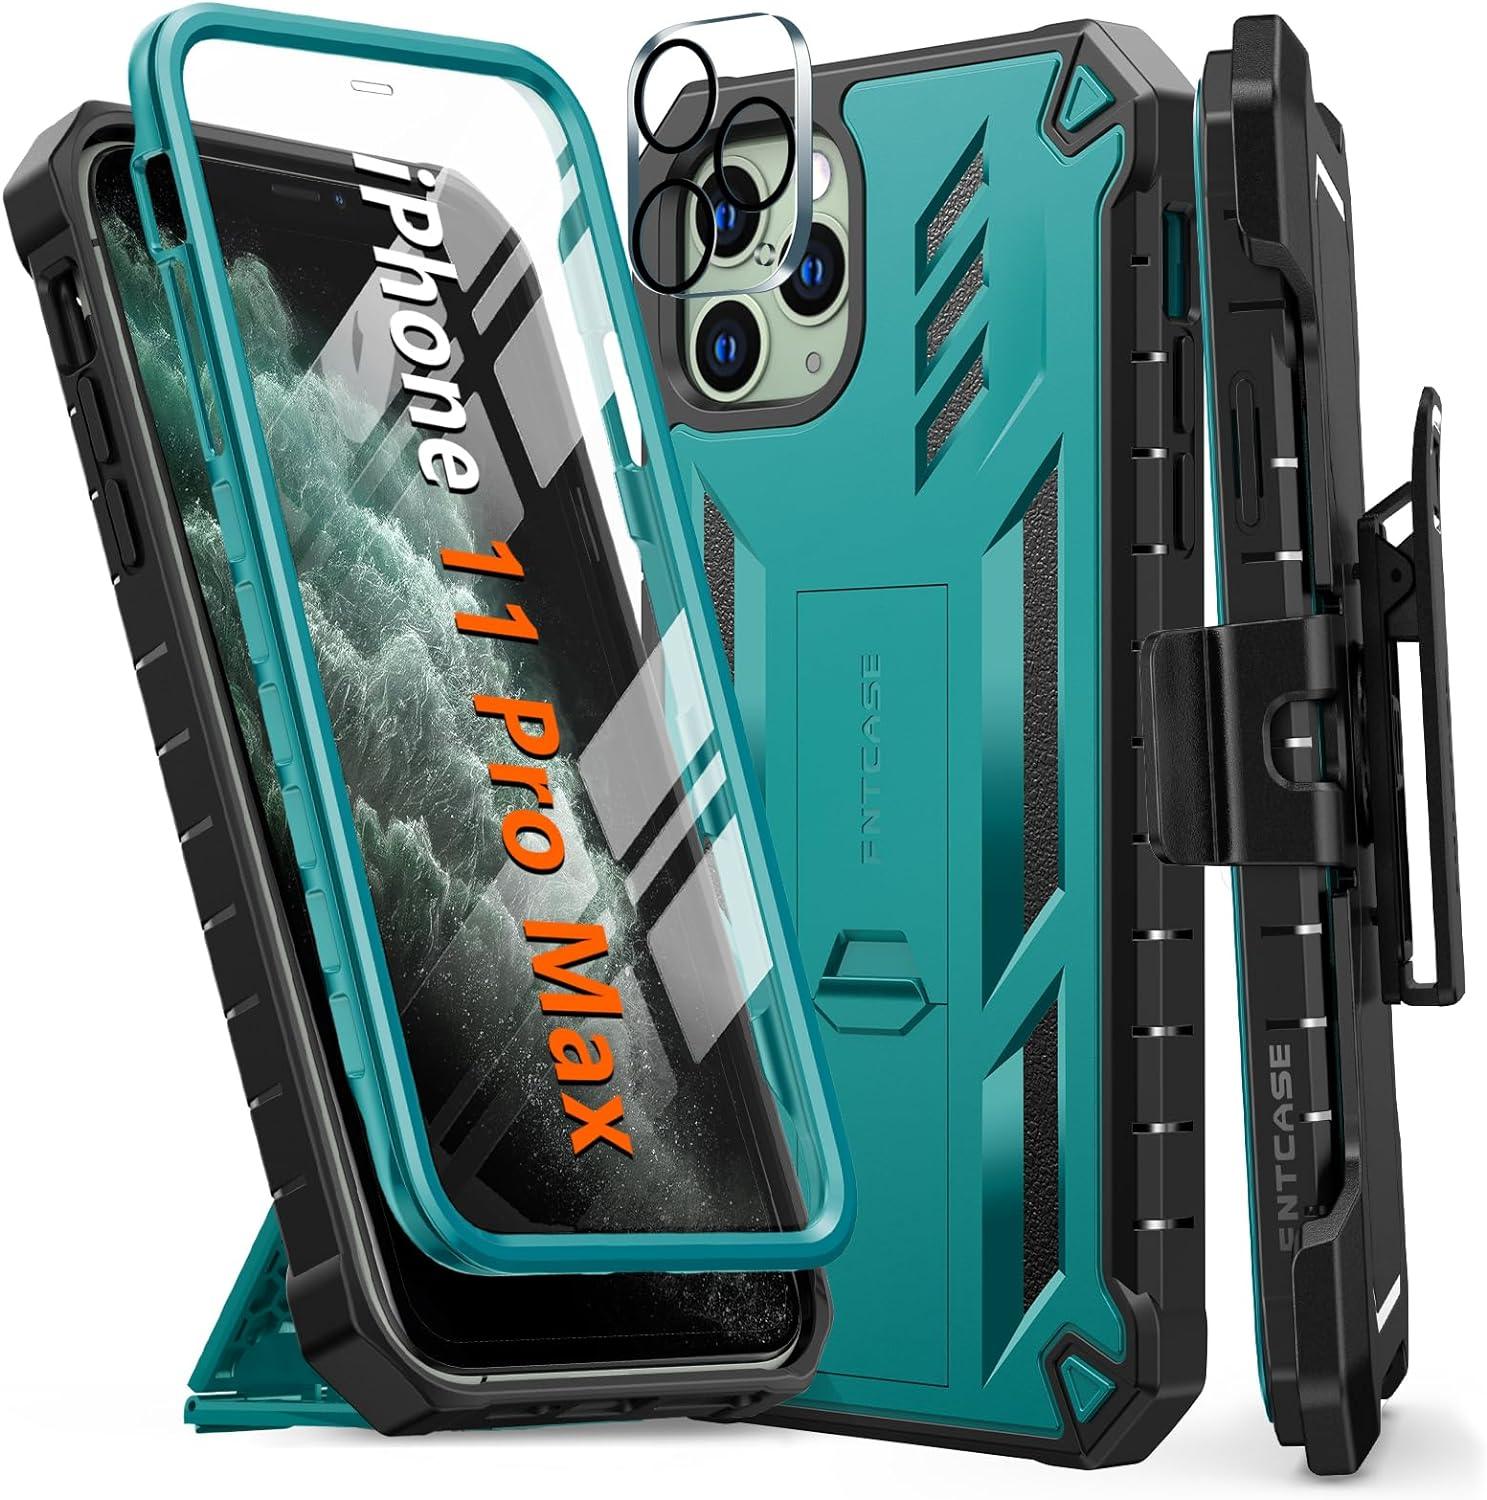 iPhone 11 Pro Max Protective Case with Belt Clip Holster Pea Green